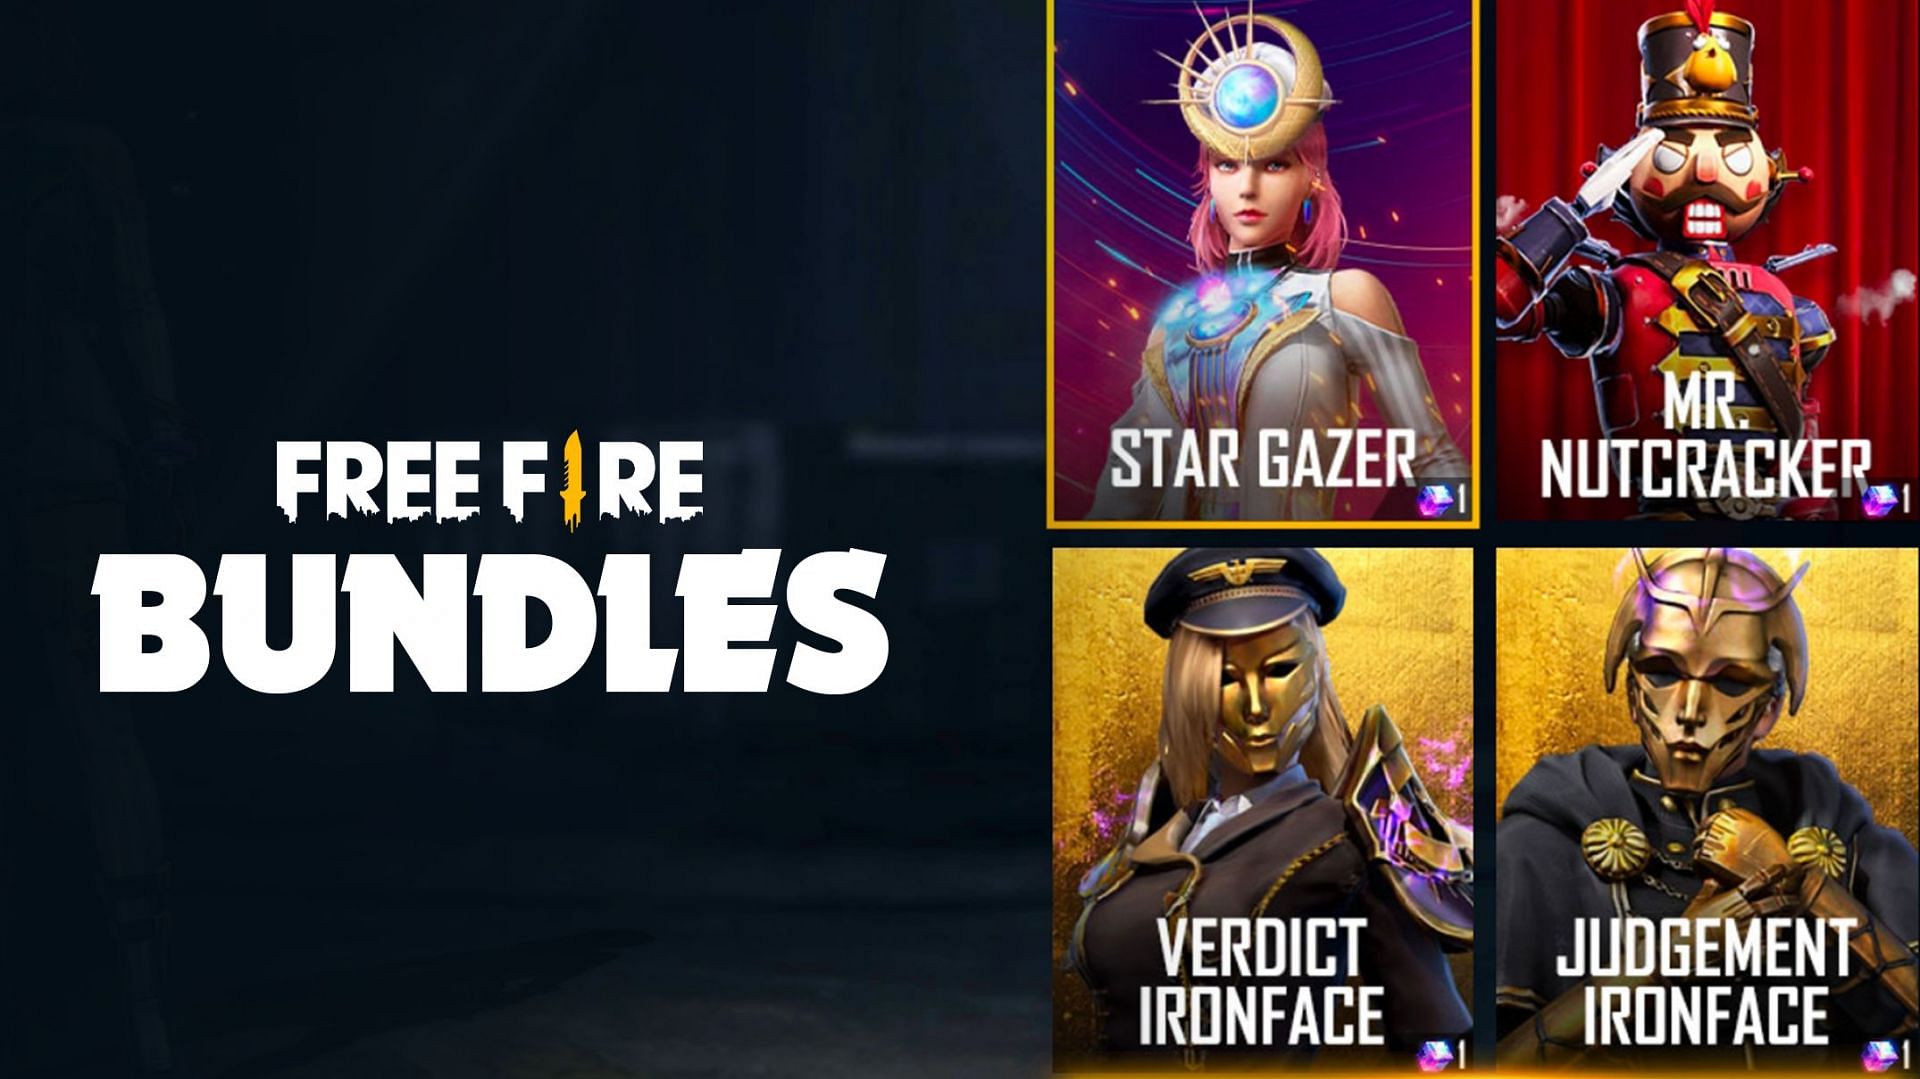 The best character bundles available in the Free Fire store (Image via Sportskeeda)